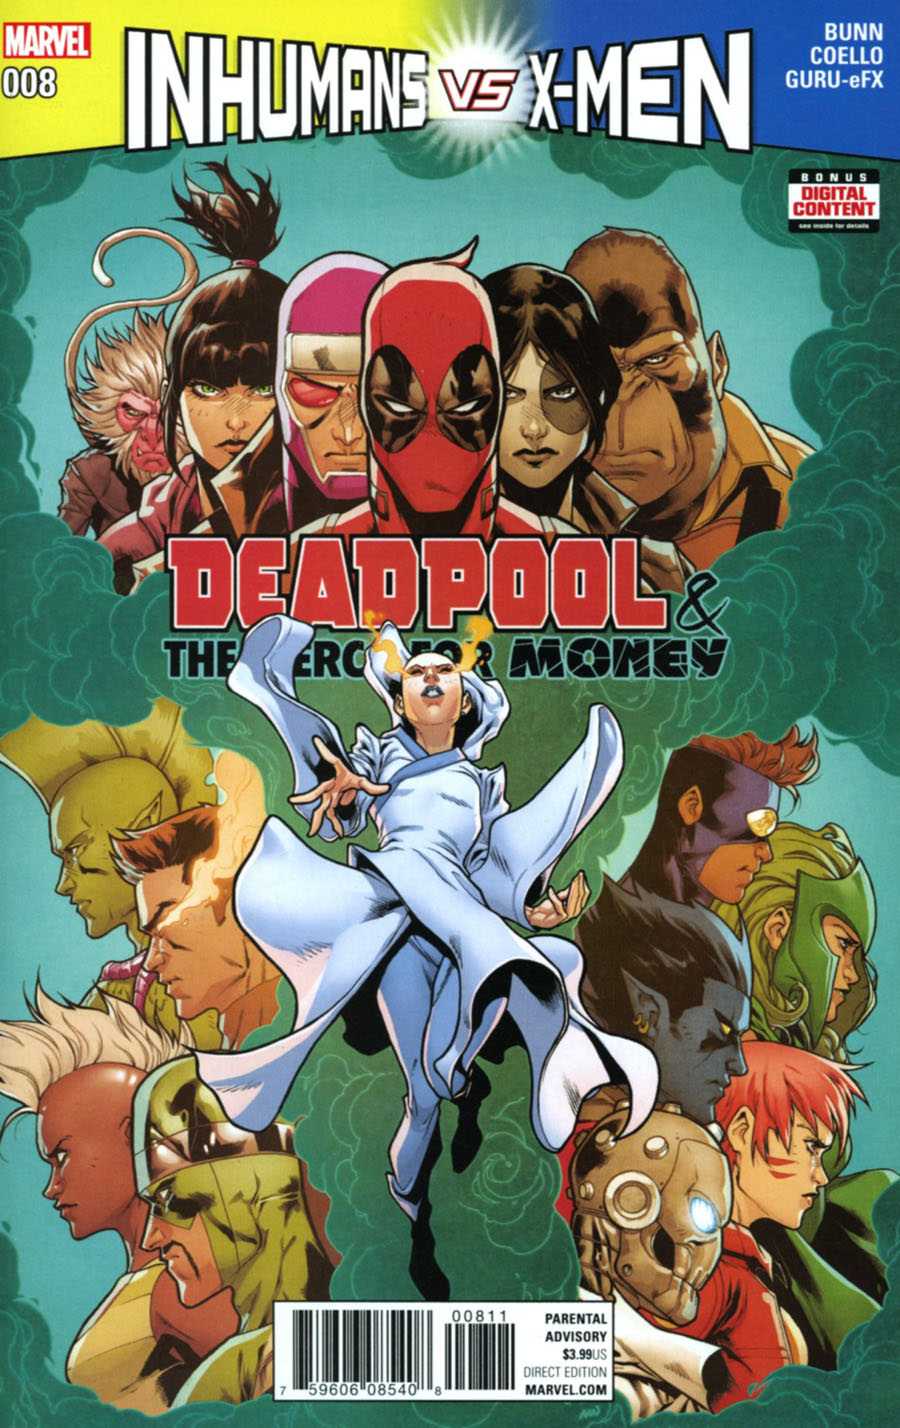 Deadpool And The Mercs For Money Vol 2 #8 Cover A Regular Iban Coello Cover (Inhumans vs X-Men Tie-In)